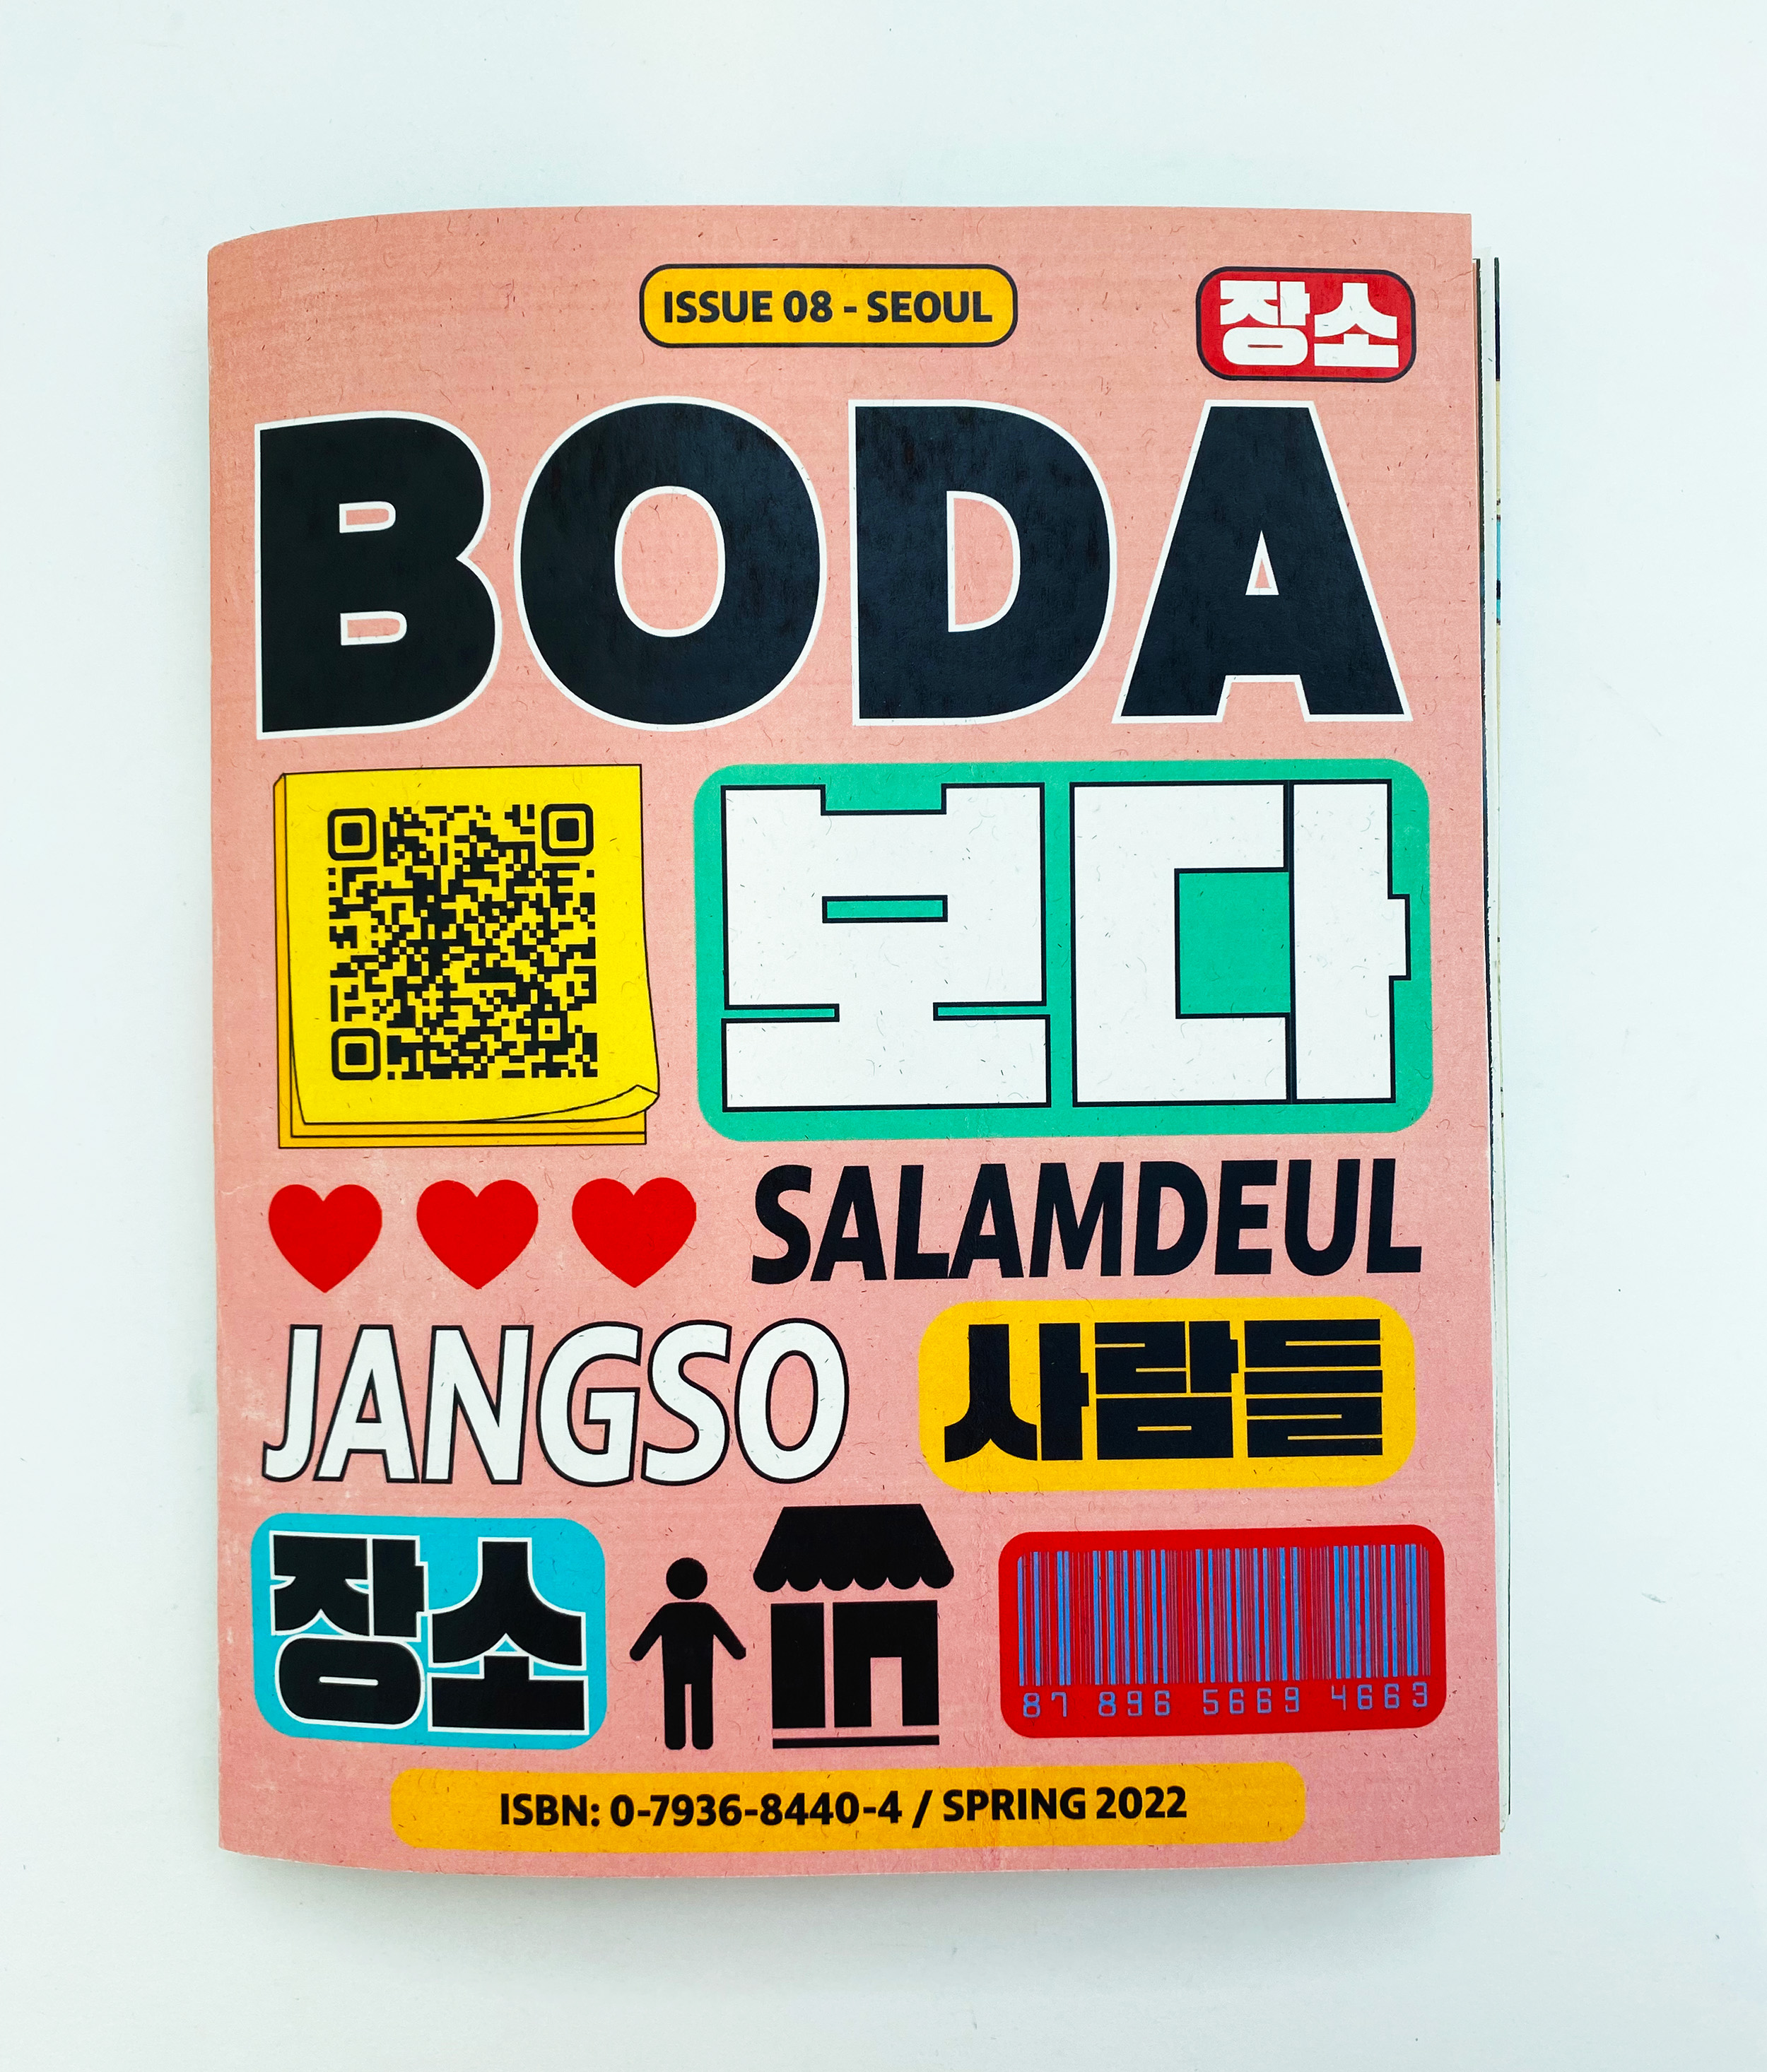 Group magazine about South Korea by Caitlin Jennings, Katie Drake and Sydney Brunning showing bright and bold design.